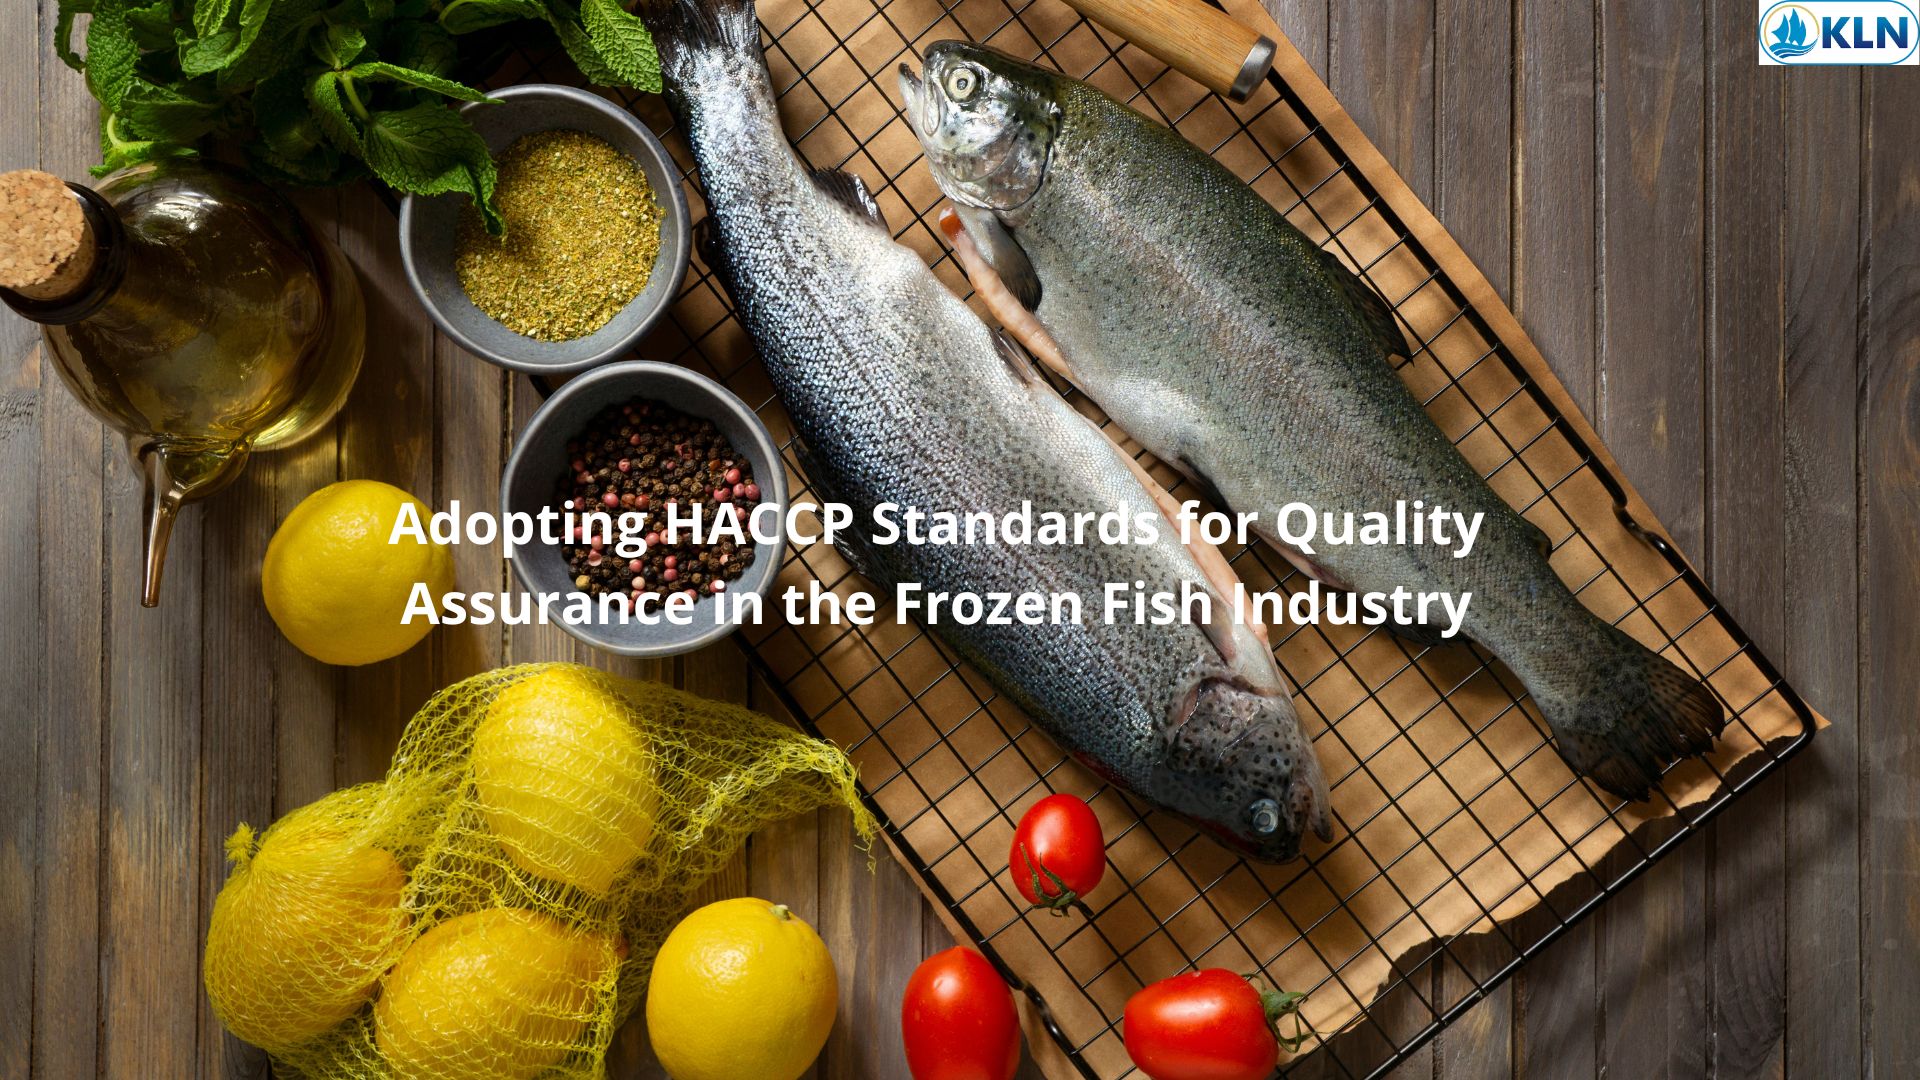 Adopting HACCP Standards for Quality Assurance in the Frozen Fish Industry